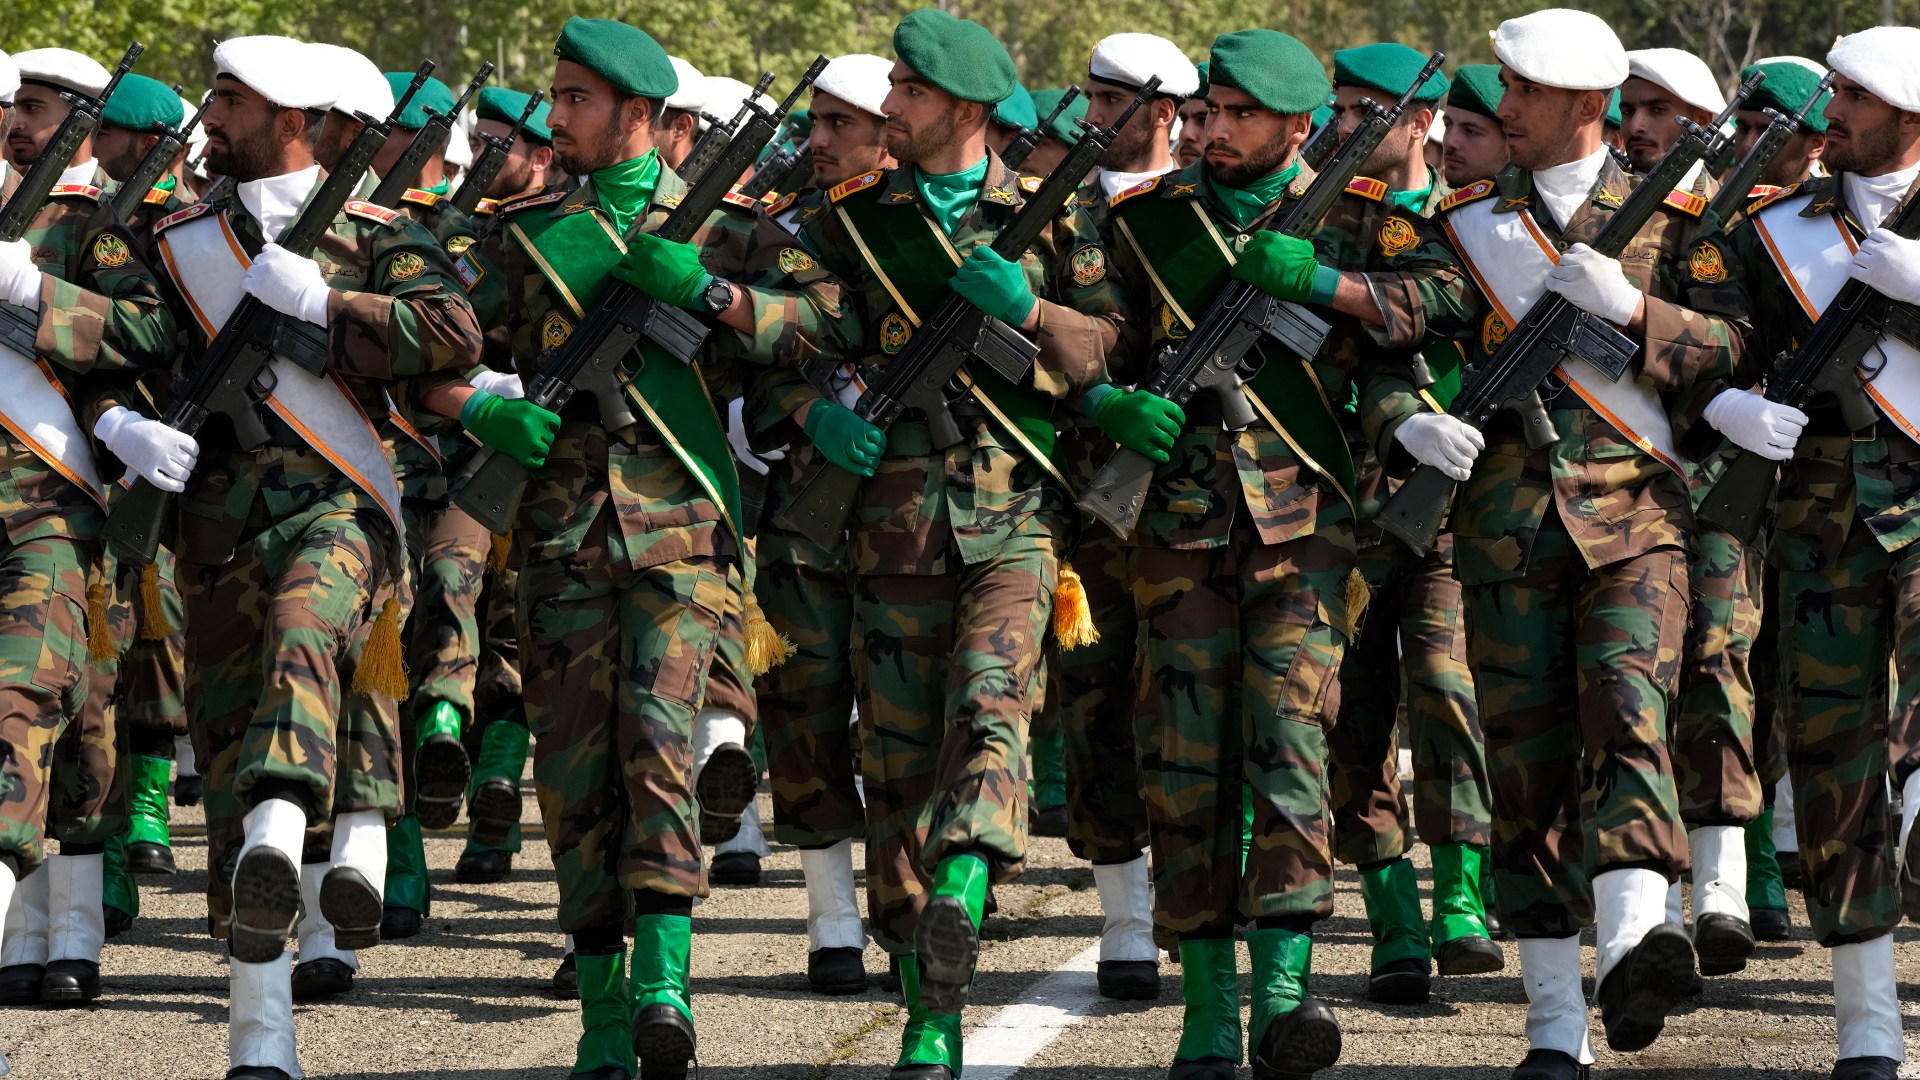 Iran parades gun-touting soldiers & missiles as president vows even ‘tiniest’ Israel attack will spark ‘fierce response’ [Video]